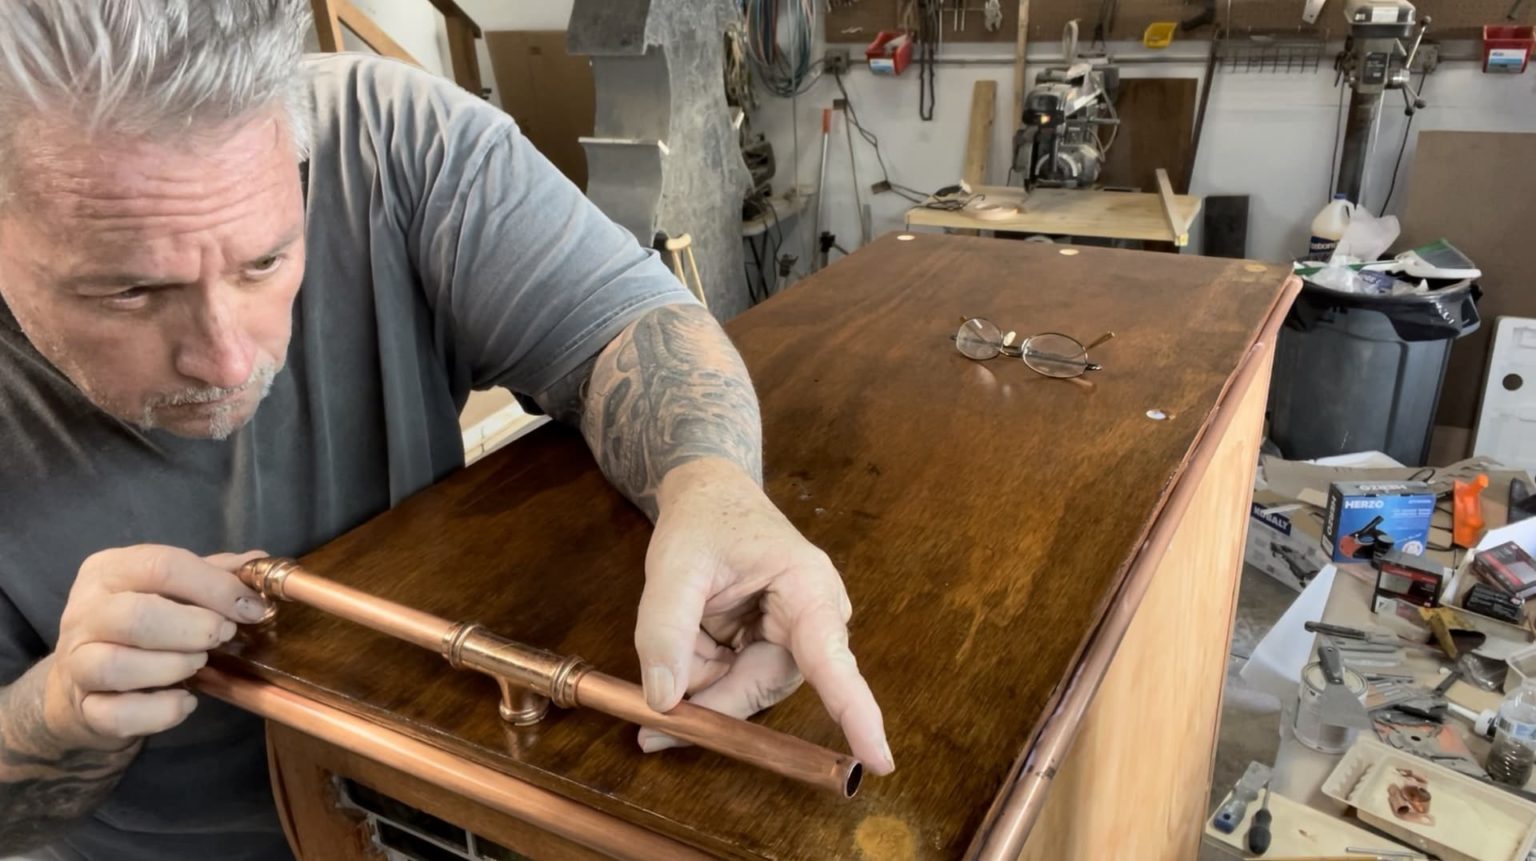 Man Placing Copper Accents On Furniture